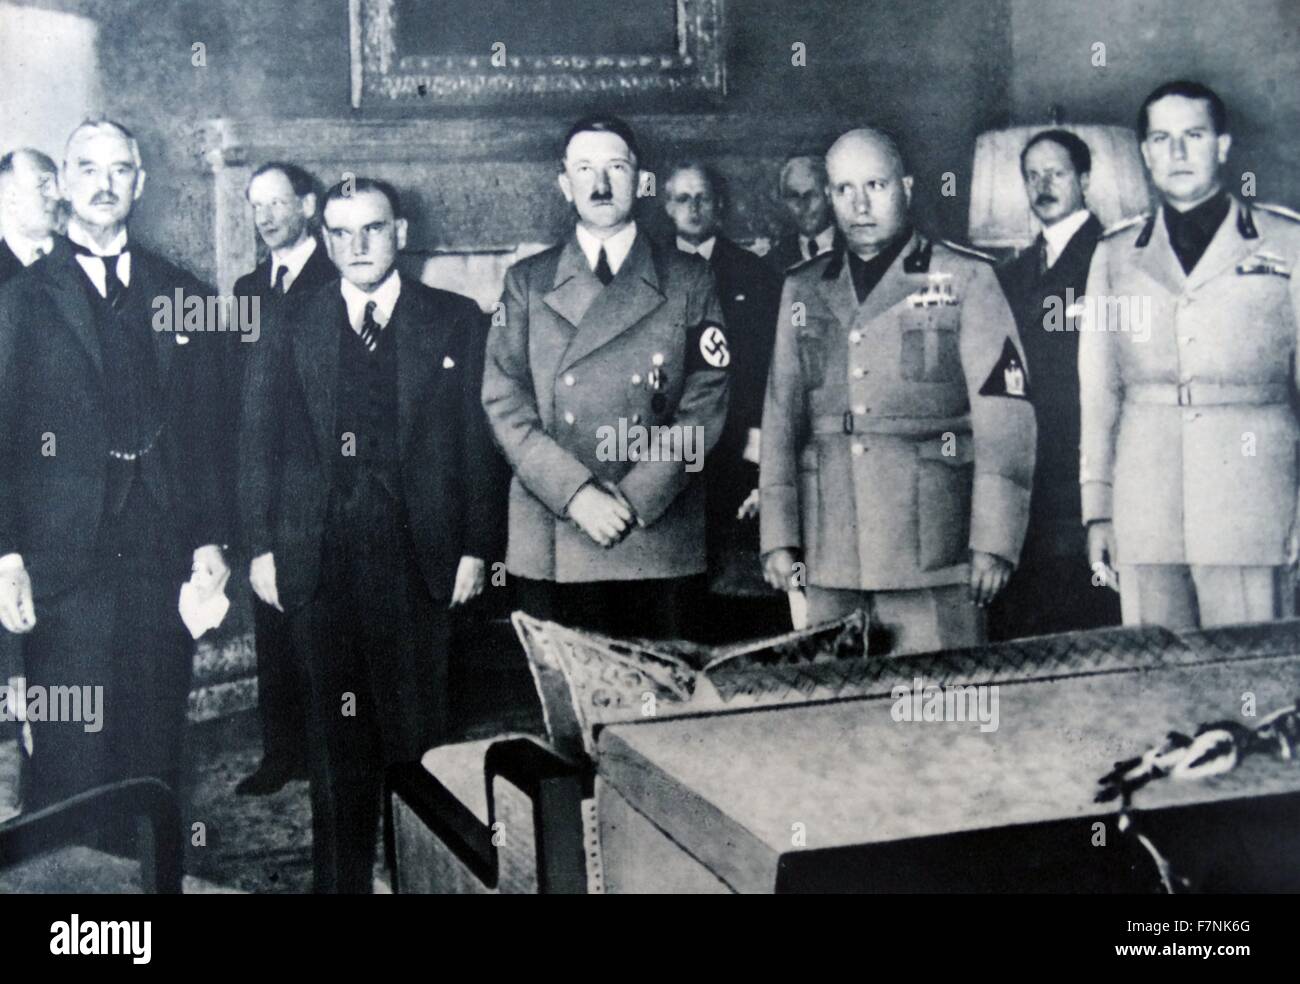 29th september 1938, Munich conference. From left to right: Chamberlain, Daladier, Hitler, Mussolini, and Ciano pictured before signing the Munich Agreement, which gave the Sudetenland to Germany. Stock Photo